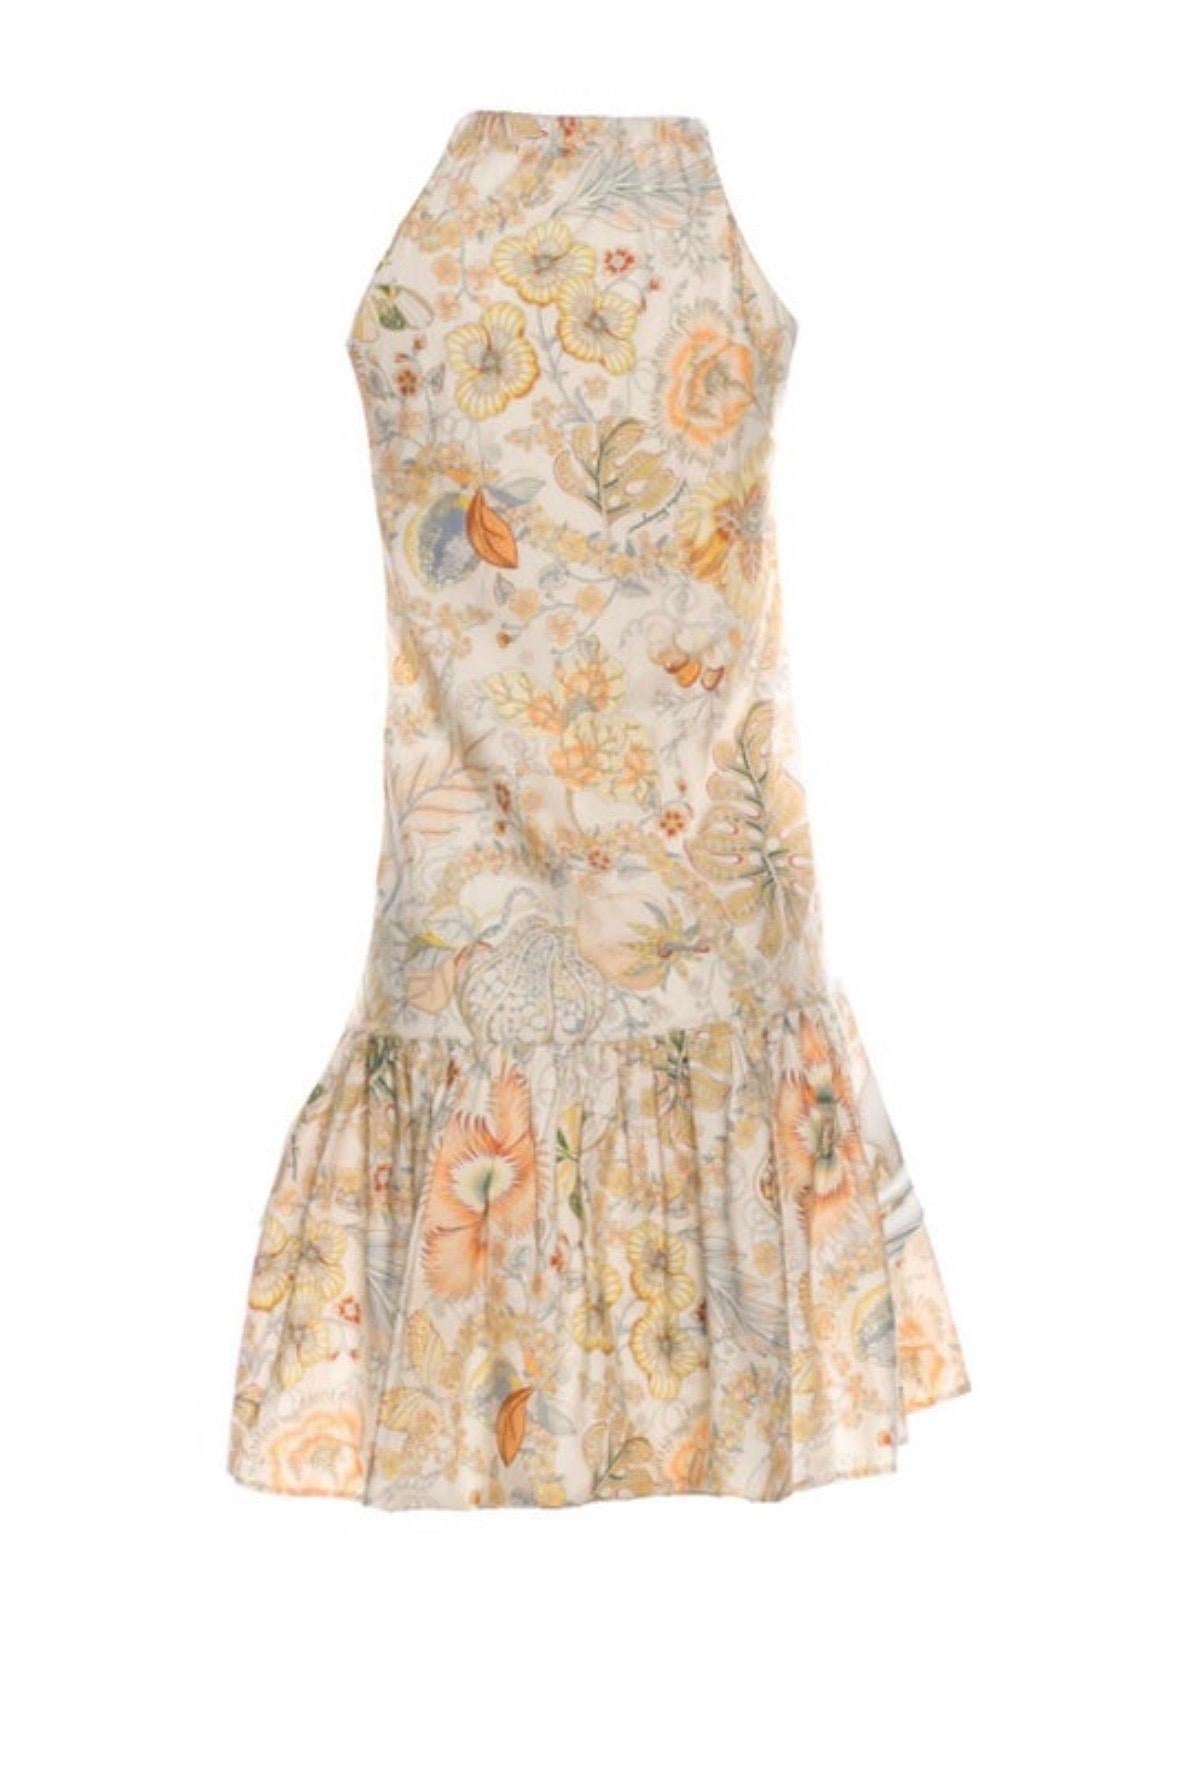 Stunning cocktail dress by Salvatore Ferragamo
Wonderful floral print all over
Closes with bow
